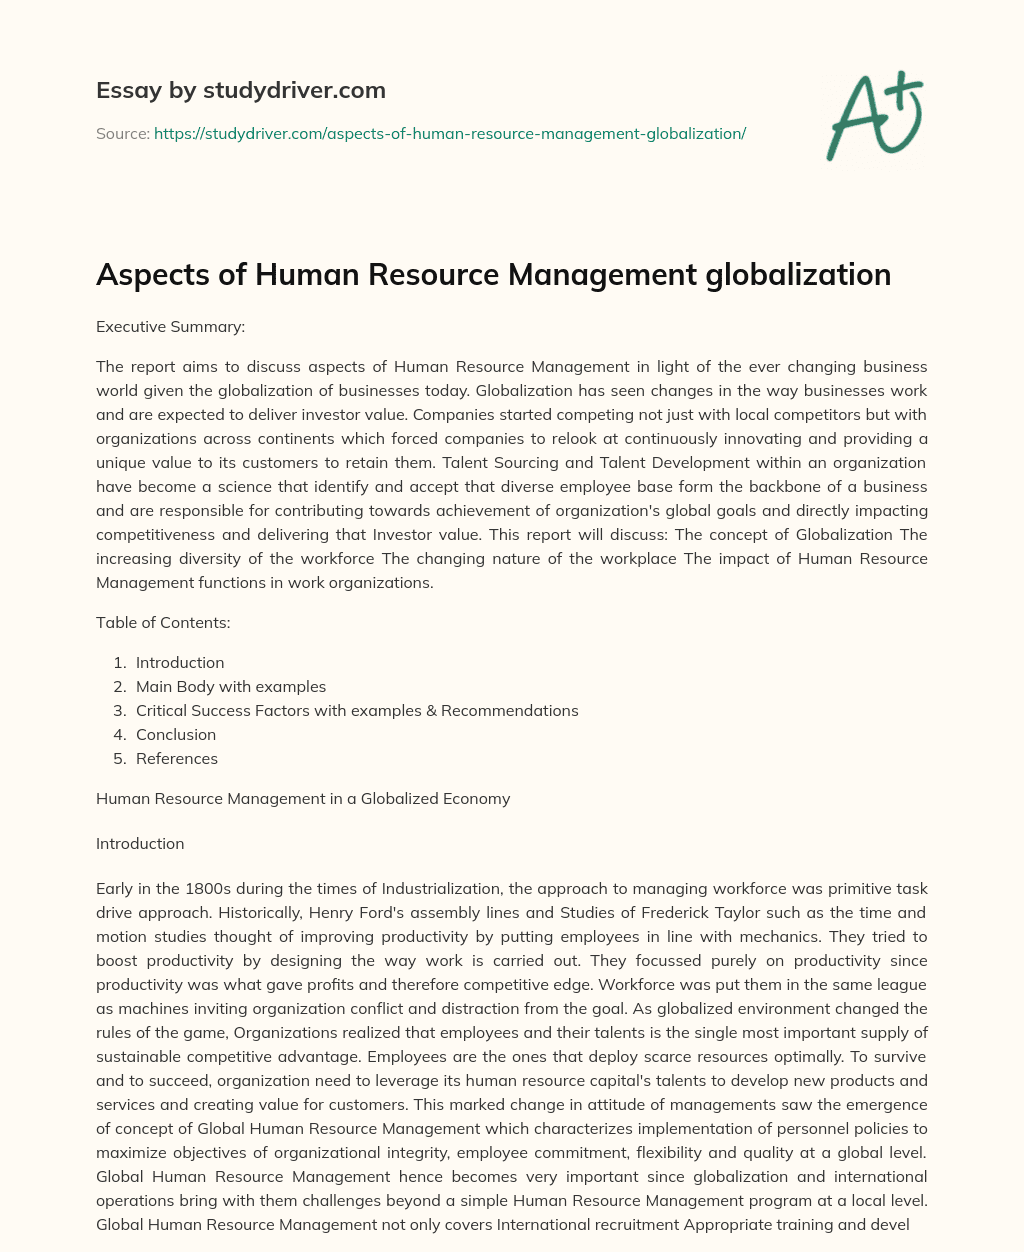 Aspects of Human Resource Management Globalization essay